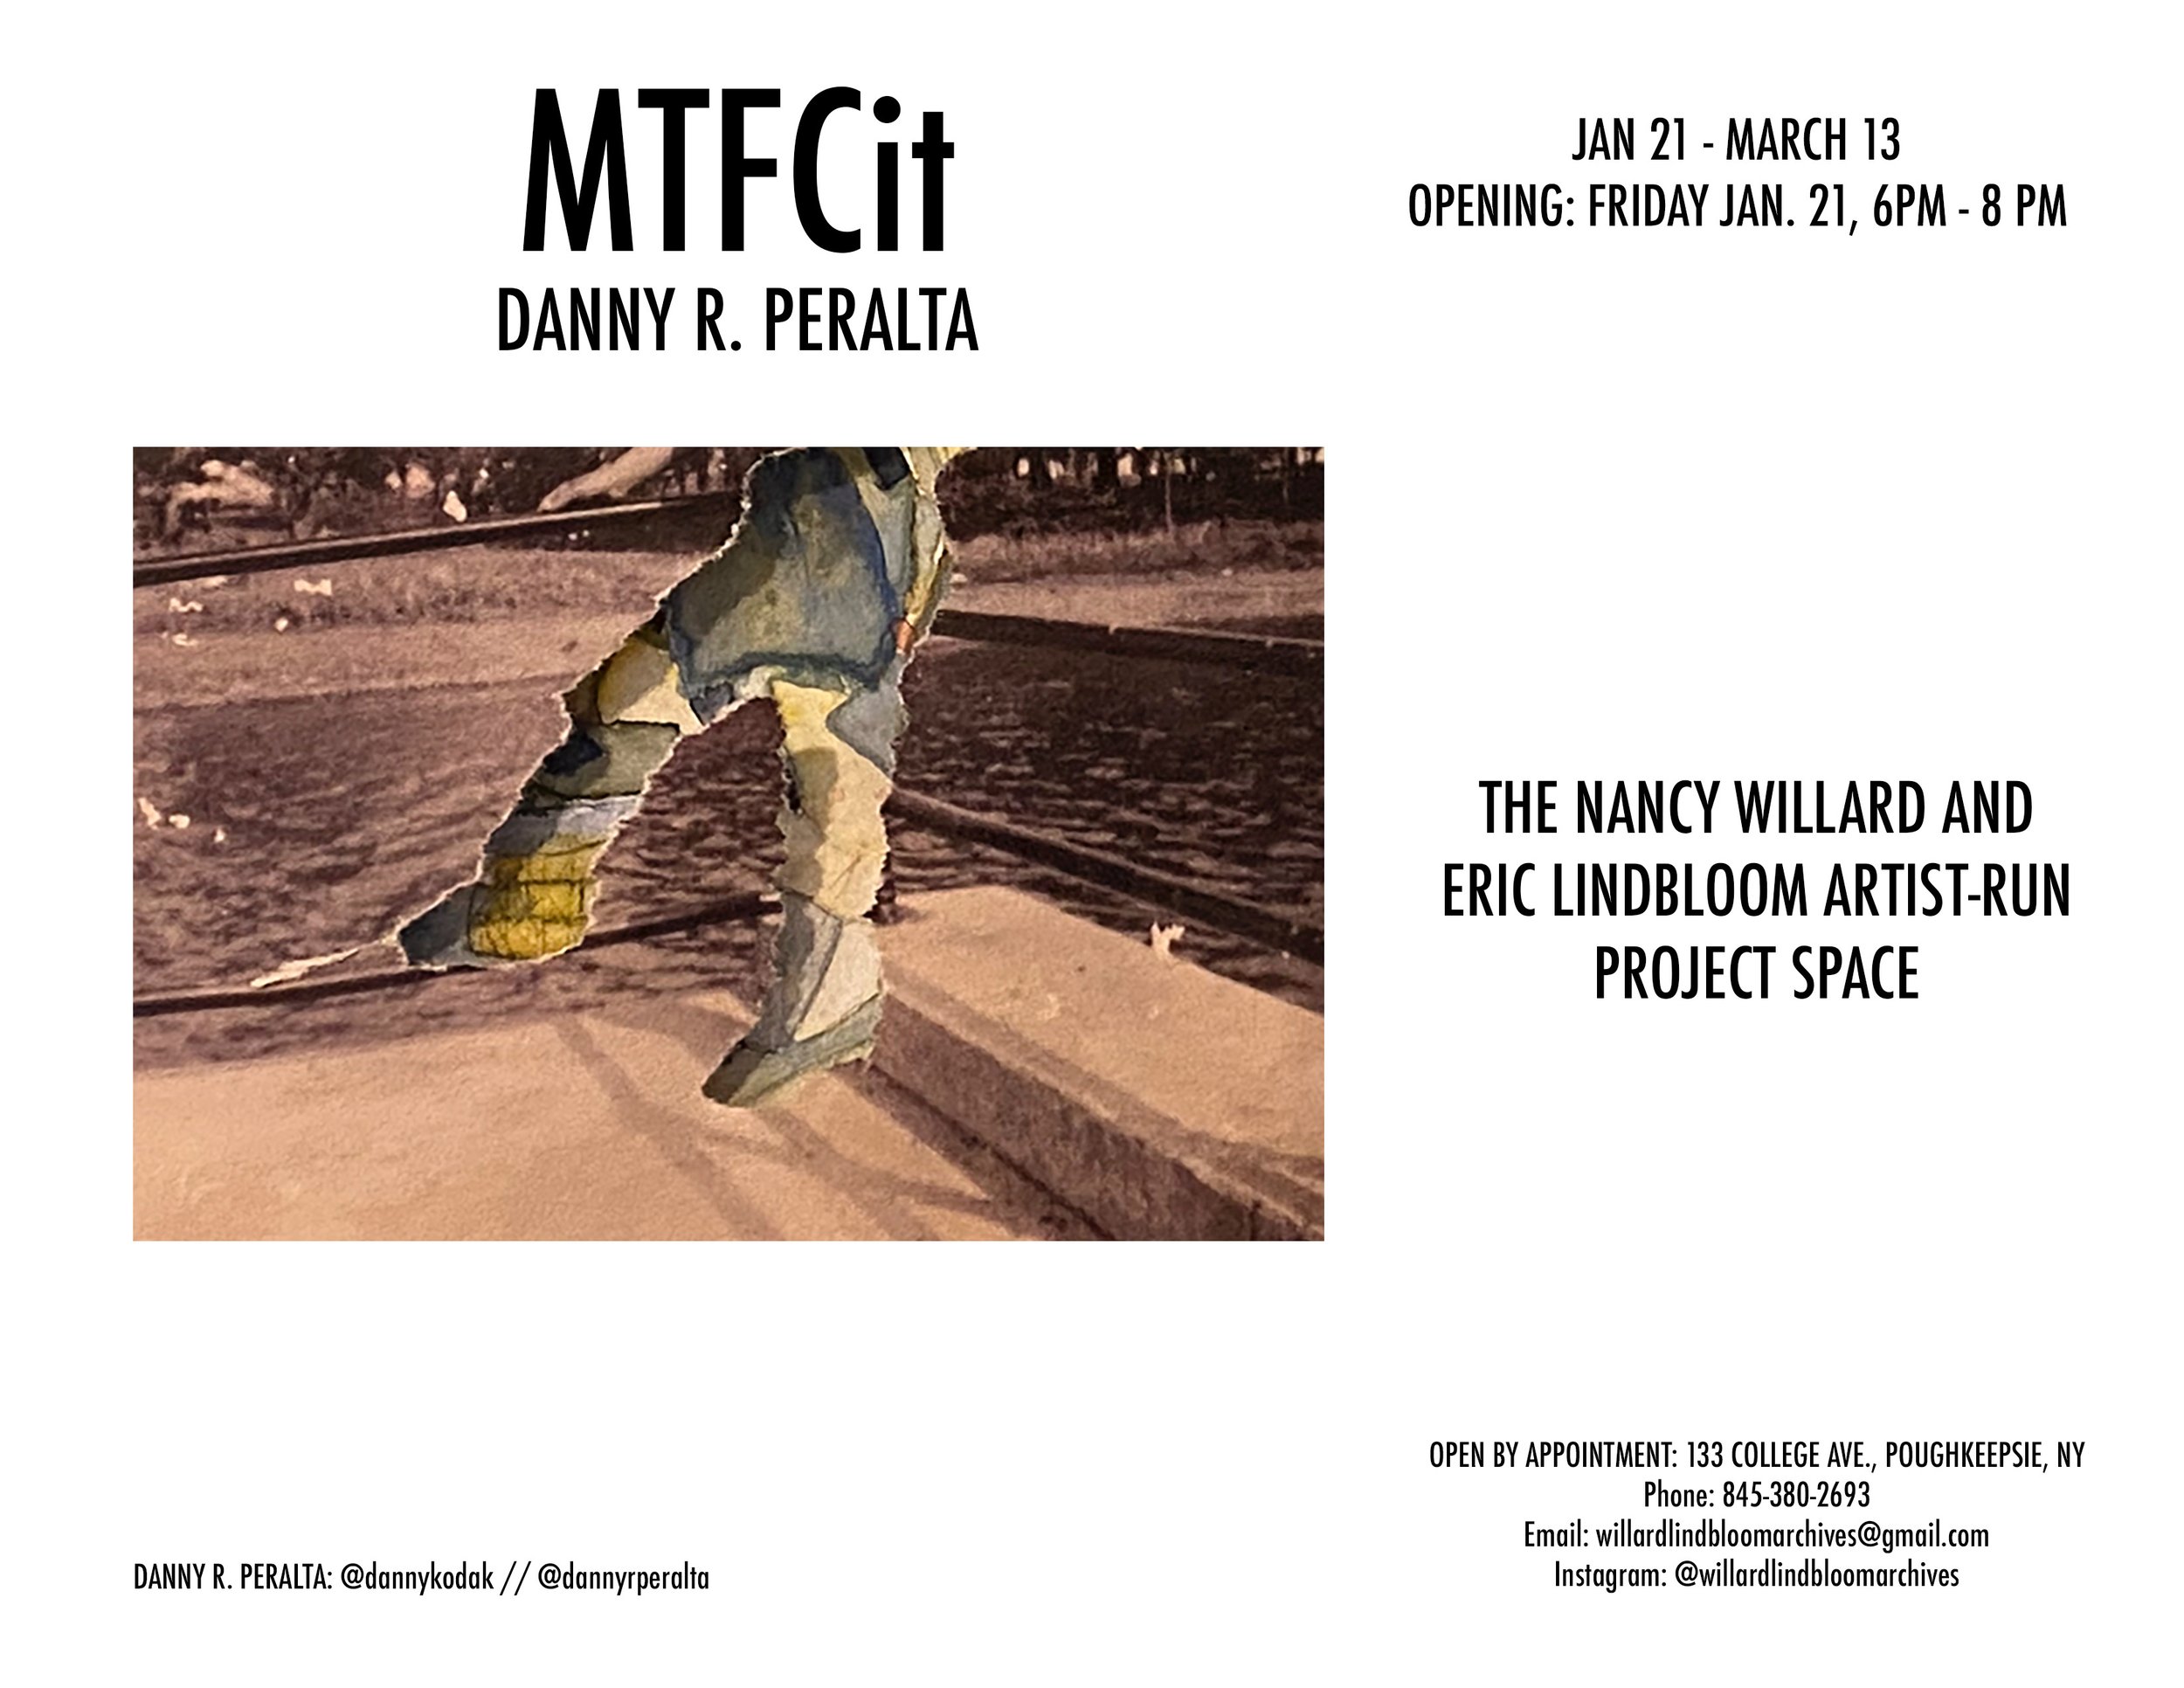  A site-specific solo exhibition at The Nancy Willard and Eric Lindbloom Artist-Run Project Space: UPSTAIRS GALLERIES  Jan. 21 – March 13, 2022    MTFCit   is a riff in progress. The works on display are conversations between unknown human and natura